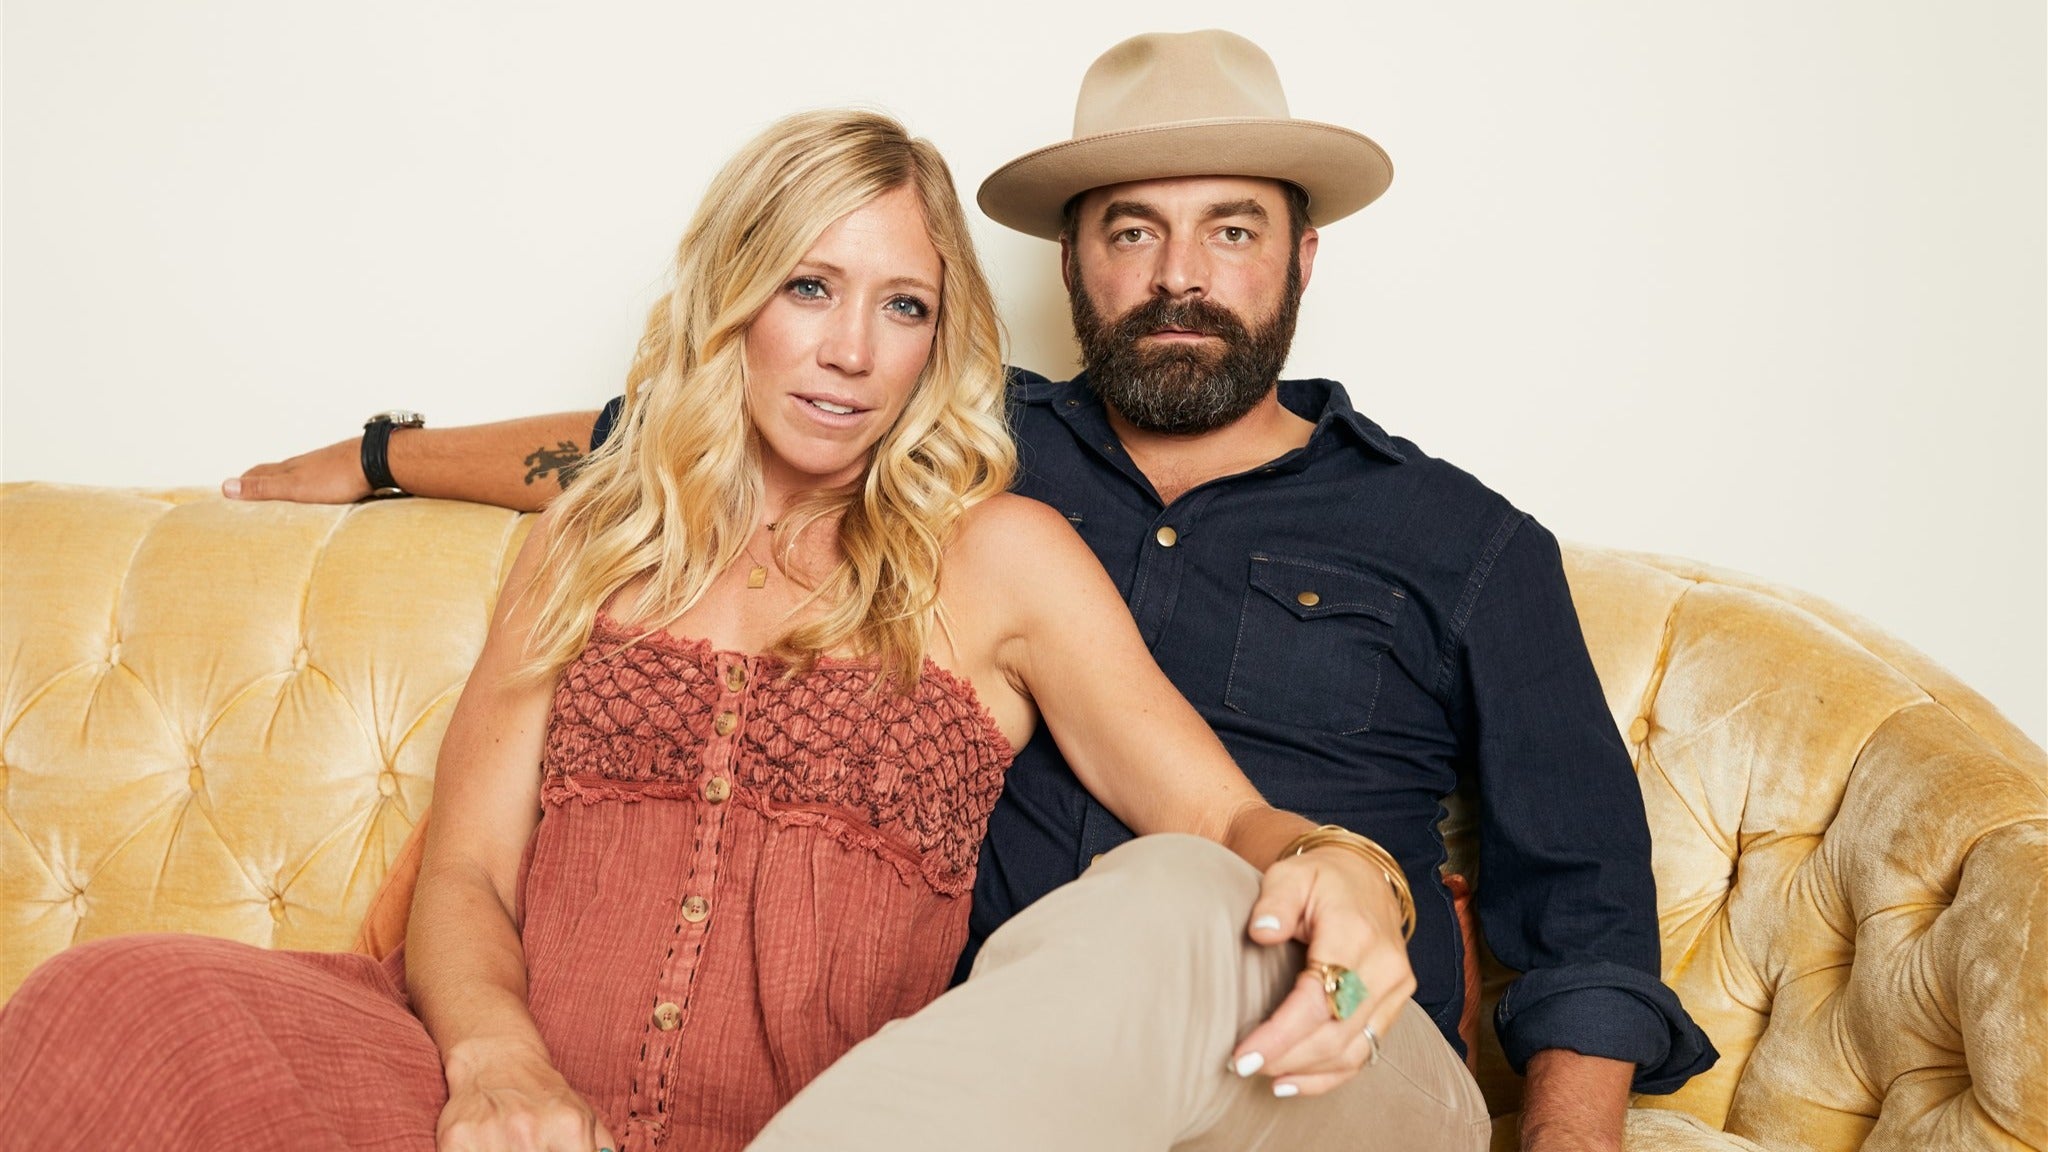 The You & Me Tour: An Evening With Drew And Ellie Holcomb in Birmingham promo photo for Venue presale offer code